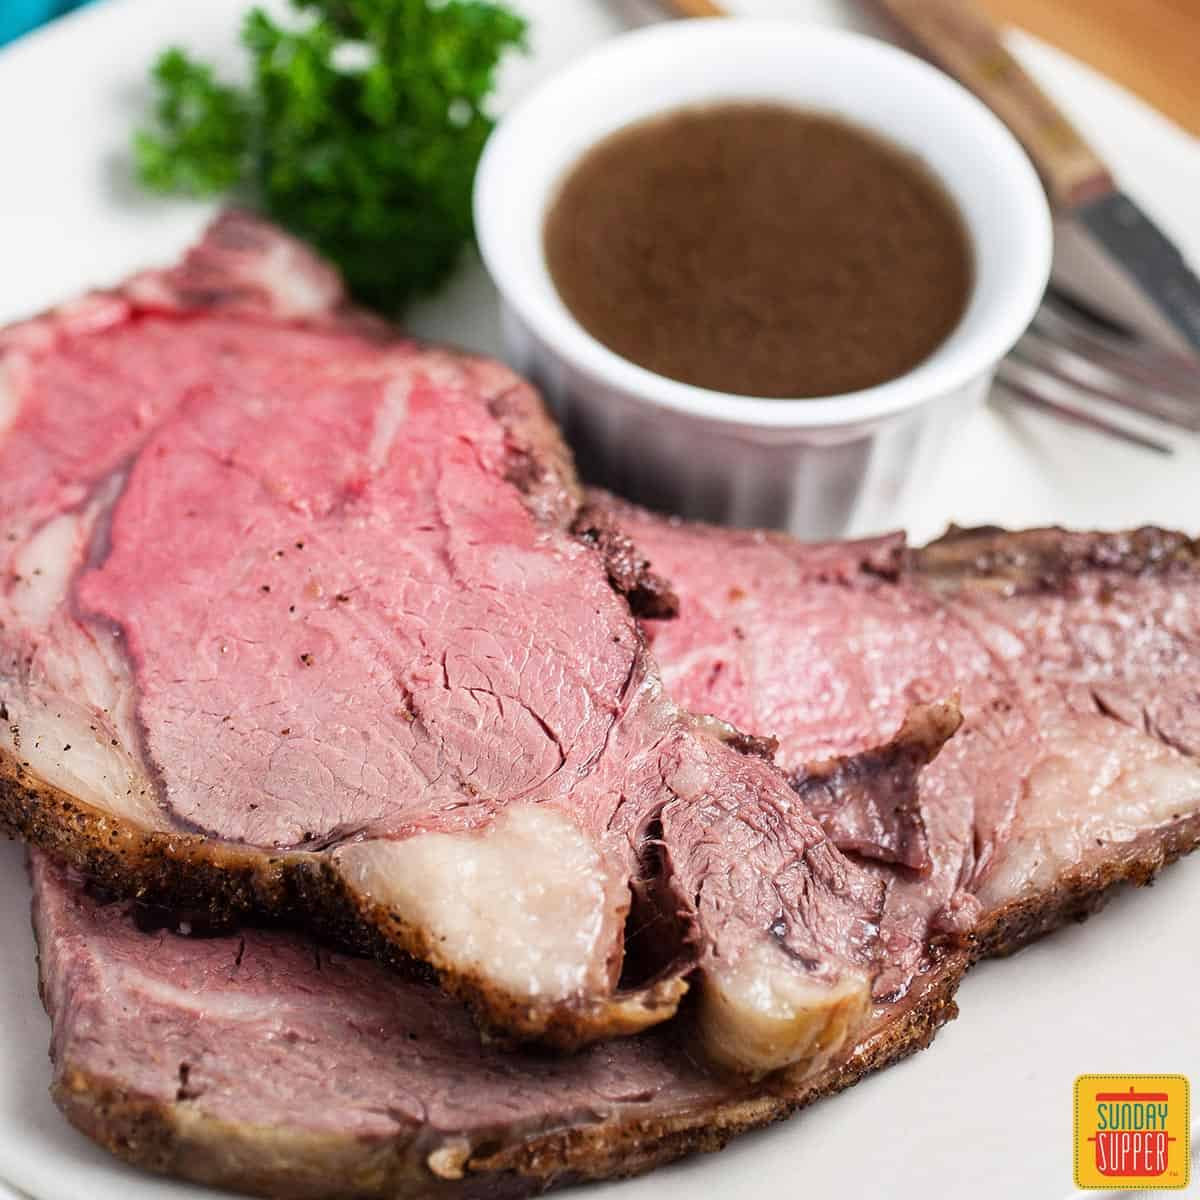 Slices of boneless prime rib on a white plate next to herbs and a ramekin of au jus